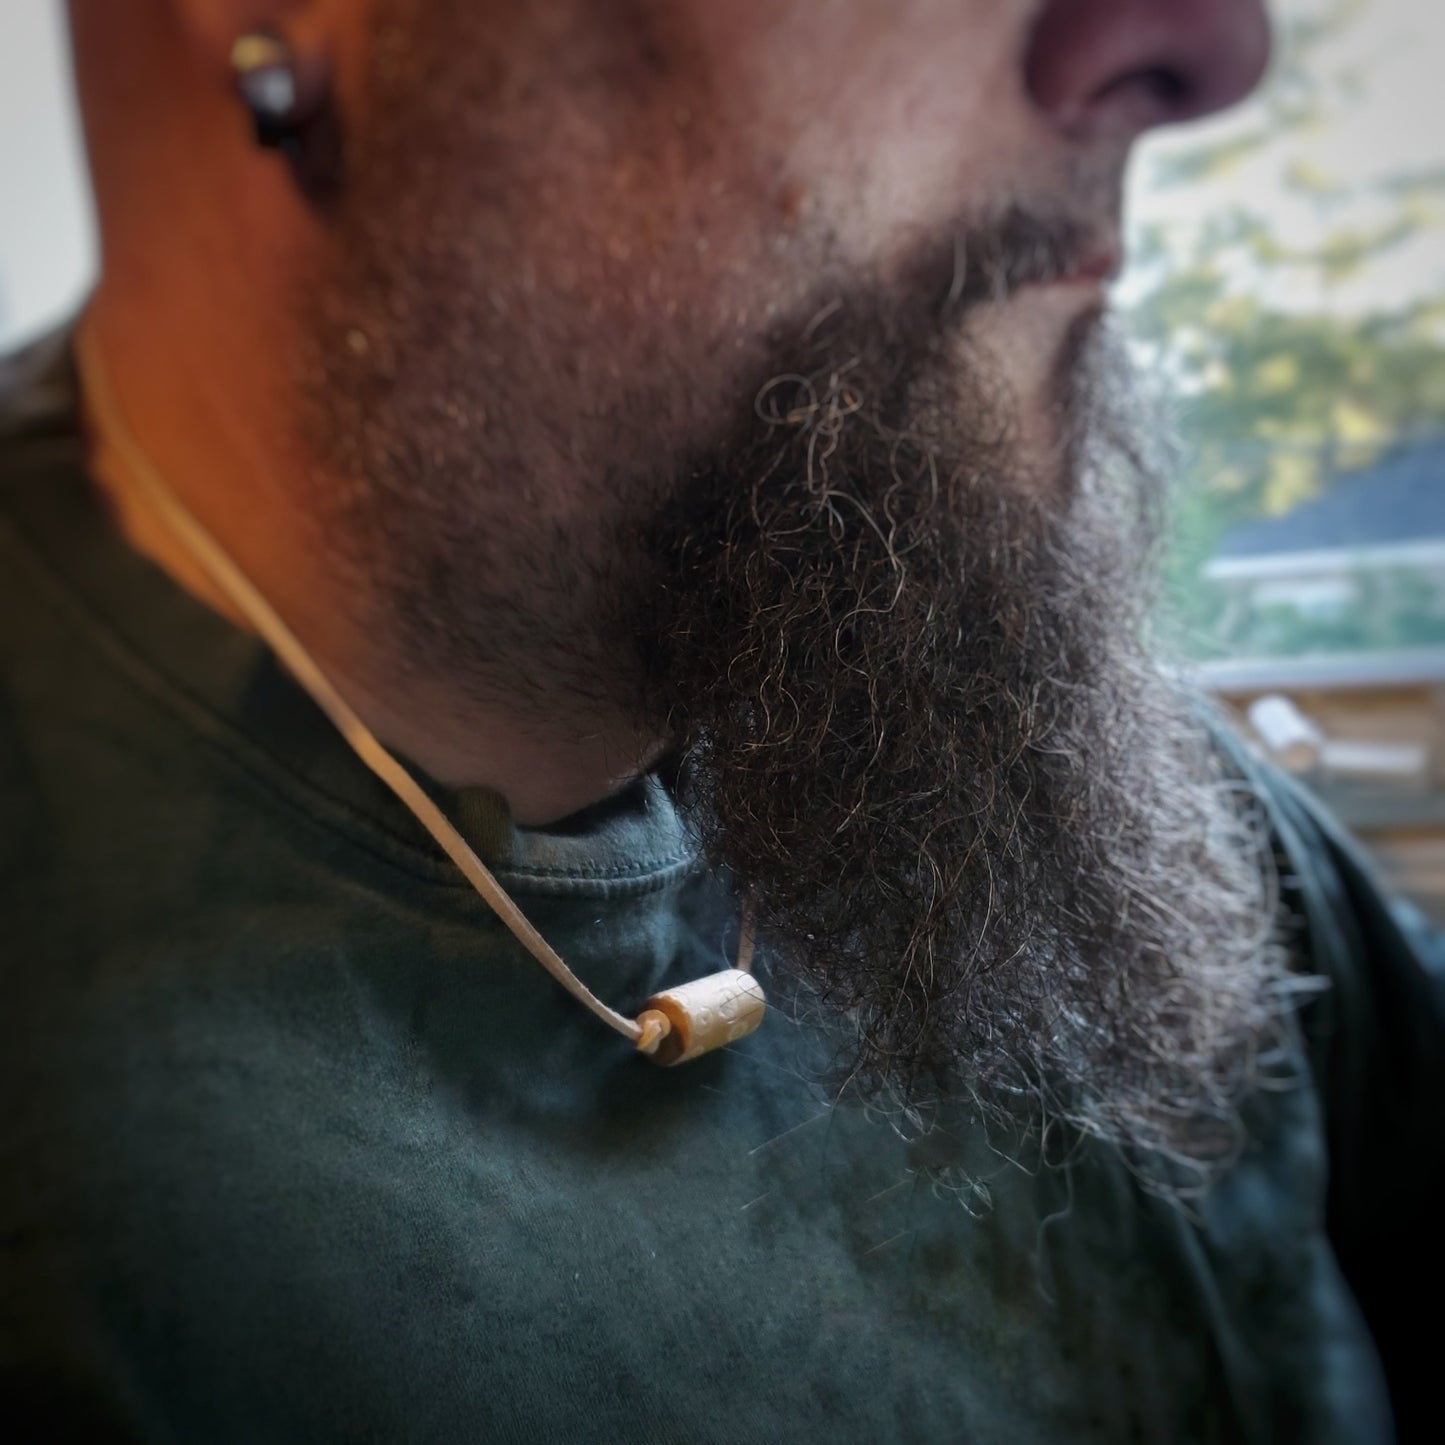 bottom of a man's head / profile (he has a beard and mustache) - he is wearing a a necklace made with a tan coloured suede cord on which a piece of drumstick has been added - the drumstick has a circle pattern etched into it 